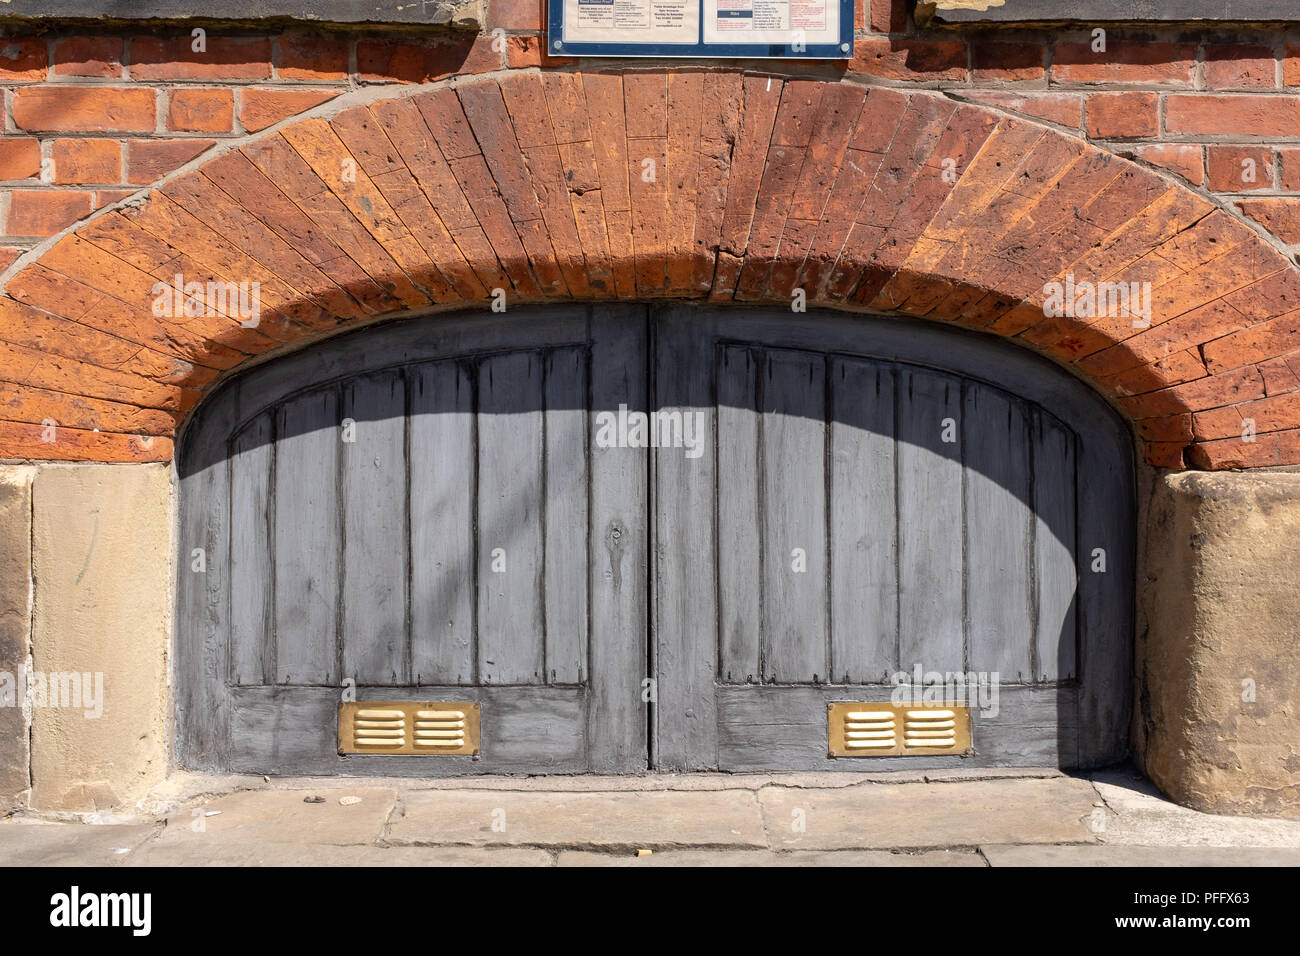 Image of Kingston Upon Hull UK City of Culture 2017. On Humber Dock is an old warehouse cellar door entrance. Stock Photo